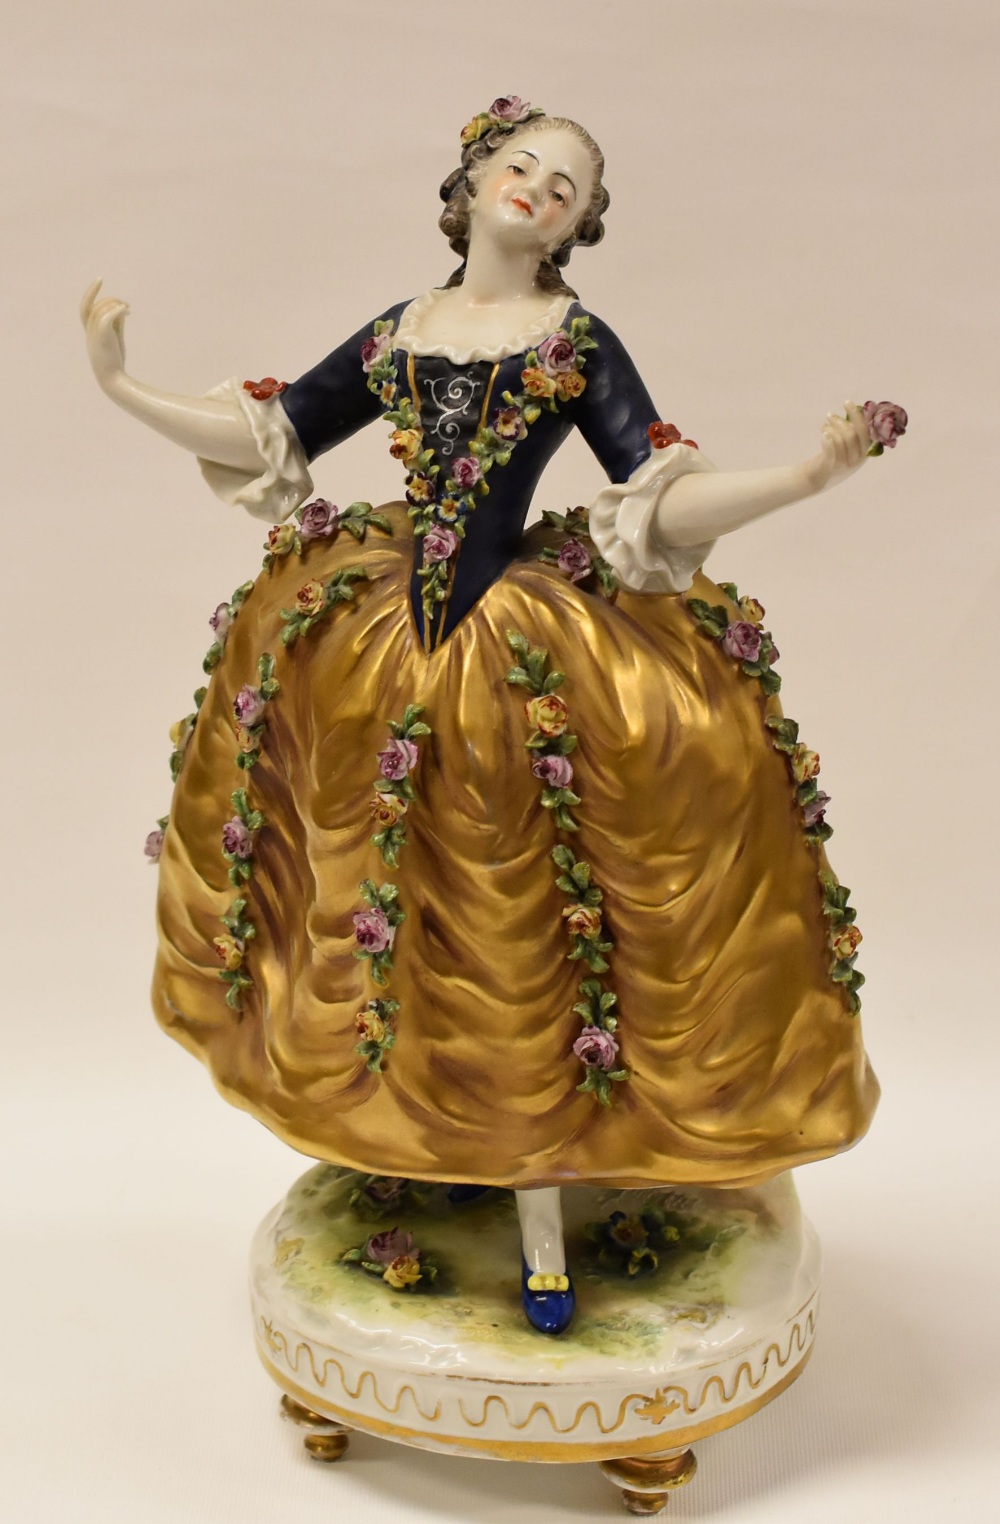 A GERMAN PORCELAIN FIGURE OF A LADY WITH FLORAL-ENCRUSTED DRESS on a raised circular base with